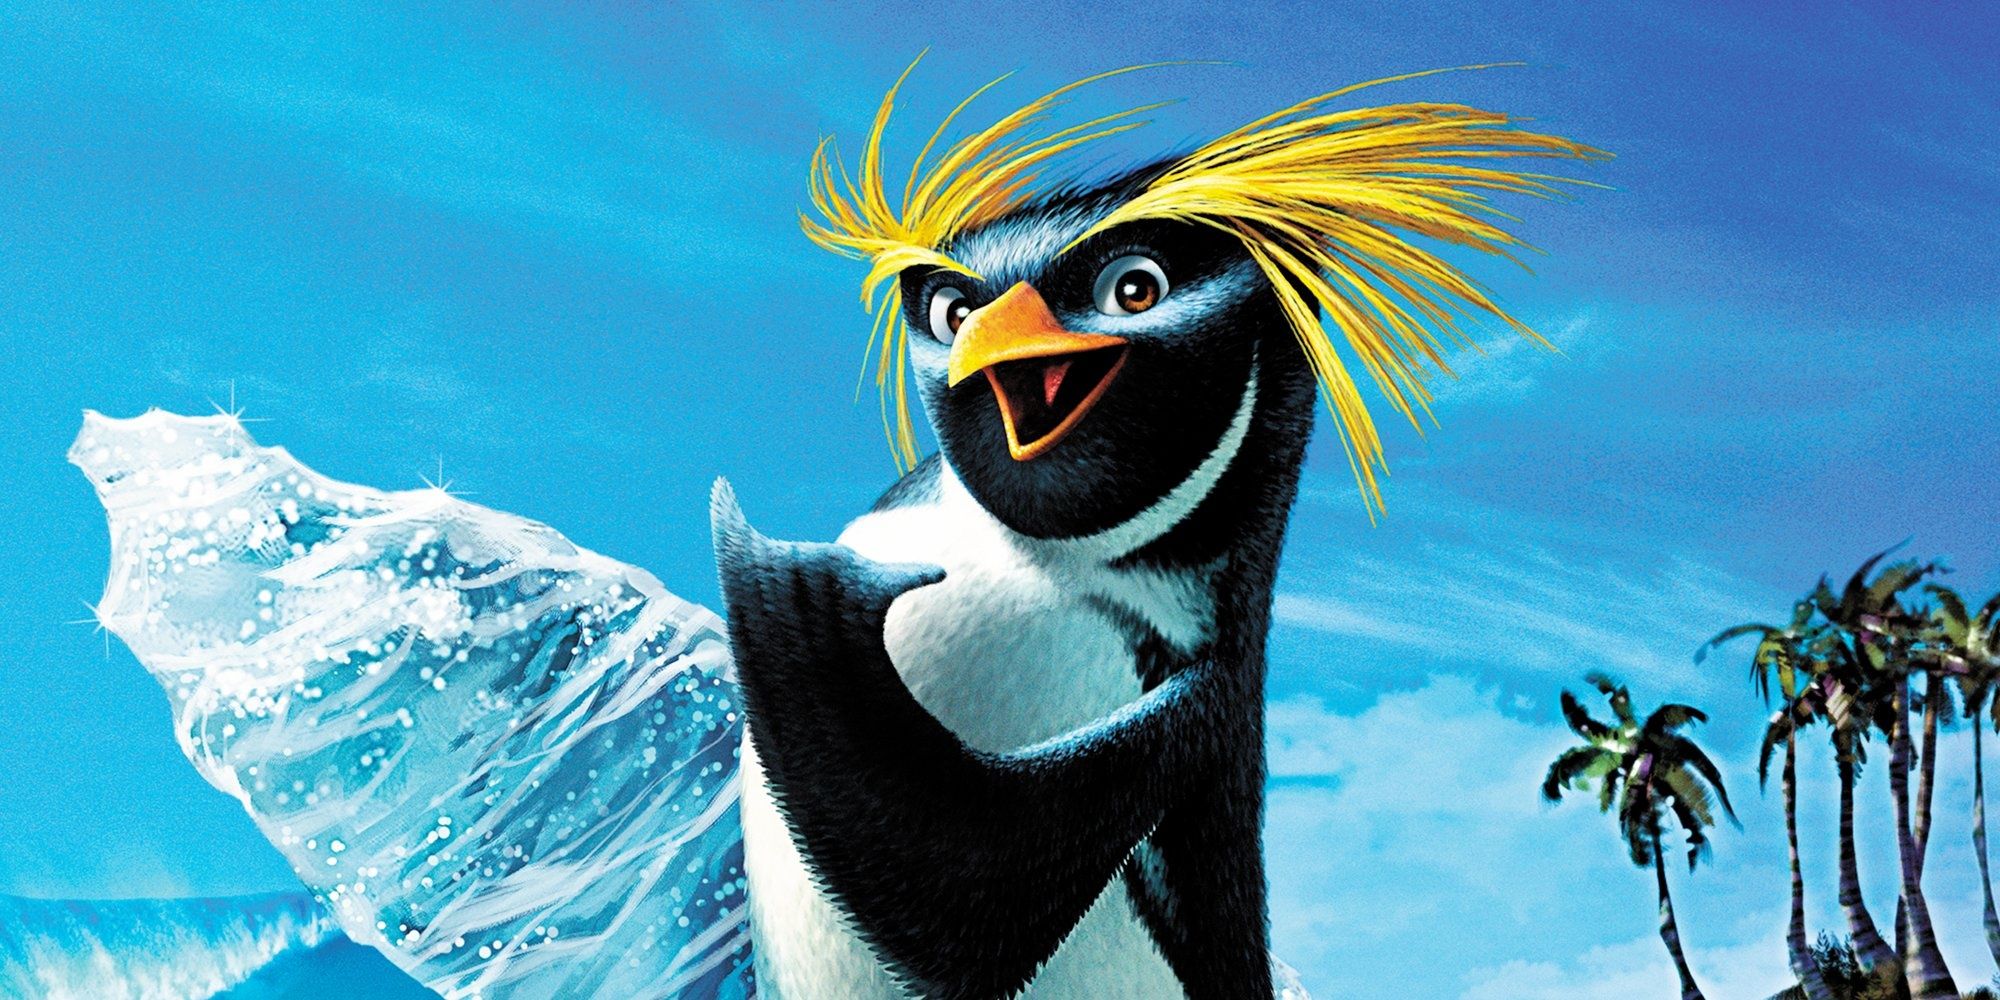 Cody on a poster for Surf's Up holding an ice board